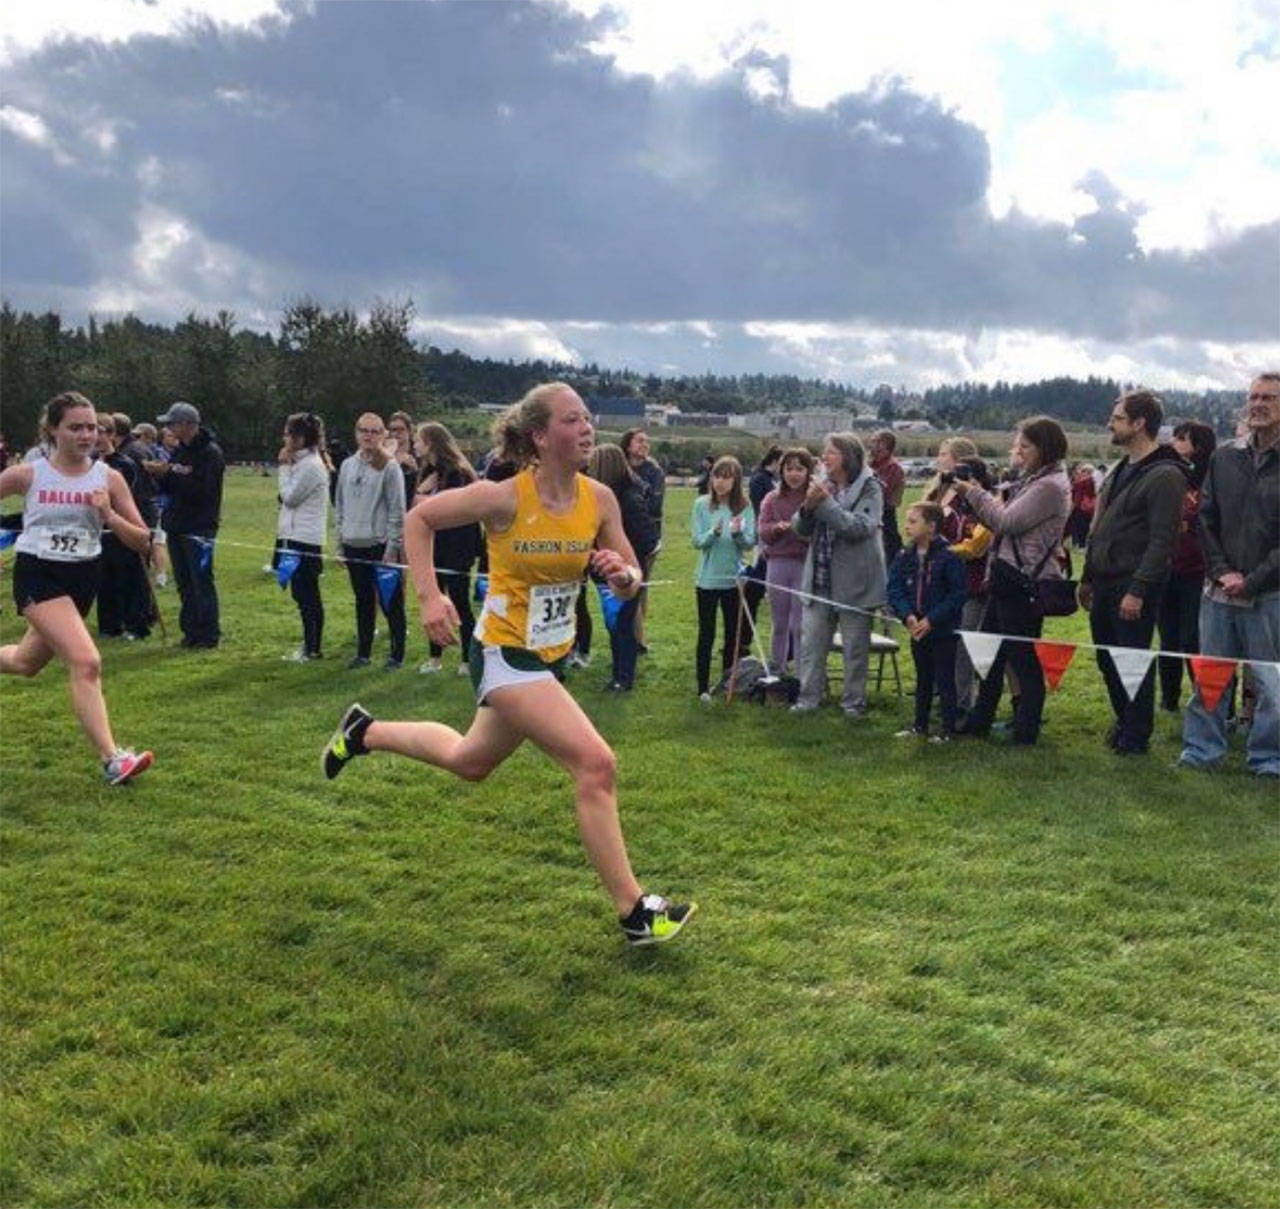 Ella Yarkin has been on the cross country team for three years now, each year holding the best girls 5k record (Photo Courtesy of Ella Yarkin, reprinted from the Vashon Riptide).